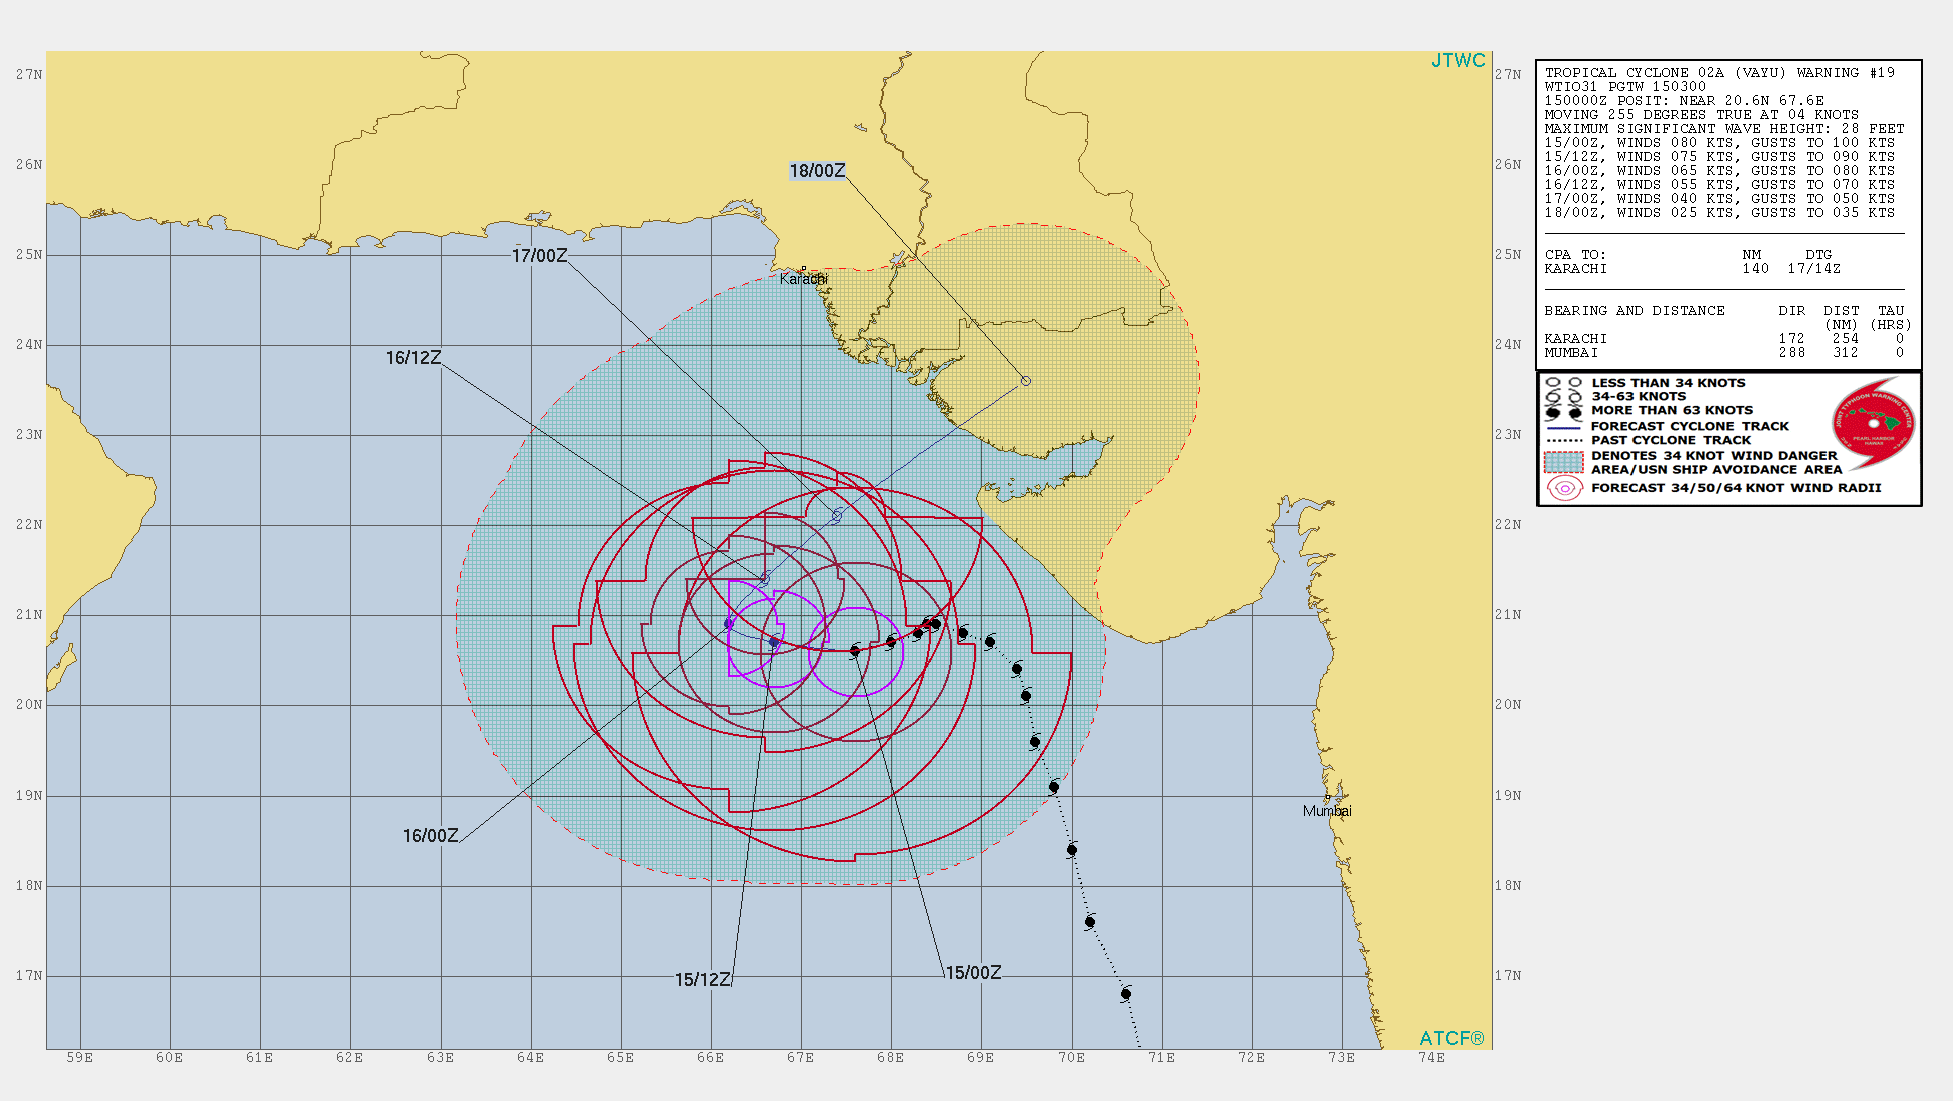 Cyclone VAYU(02A) category 1 US is forecast to weaken rapidly after 24hours due to vertical shear